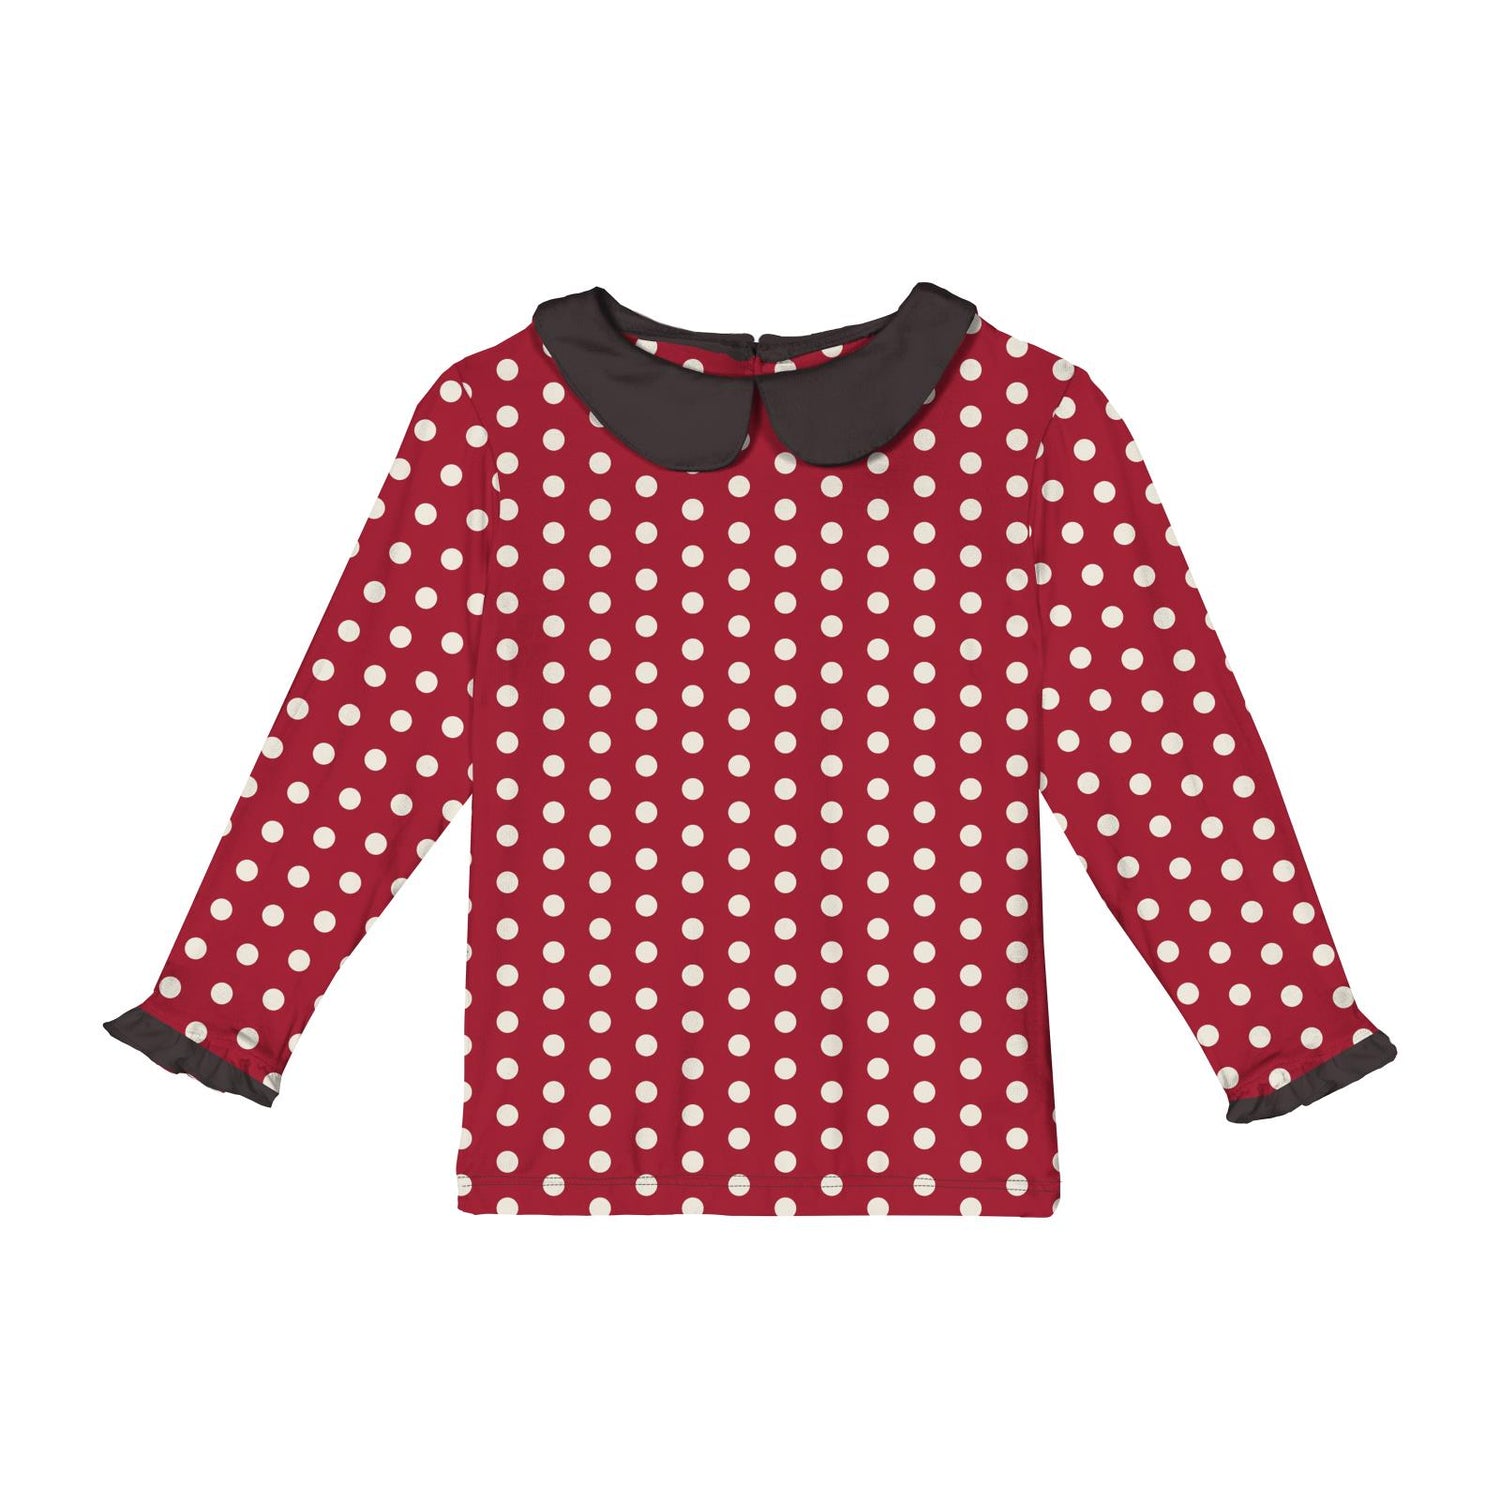 Print Long Sleeve Peter Pan Collared Tee in Candy Apple Polka Dots